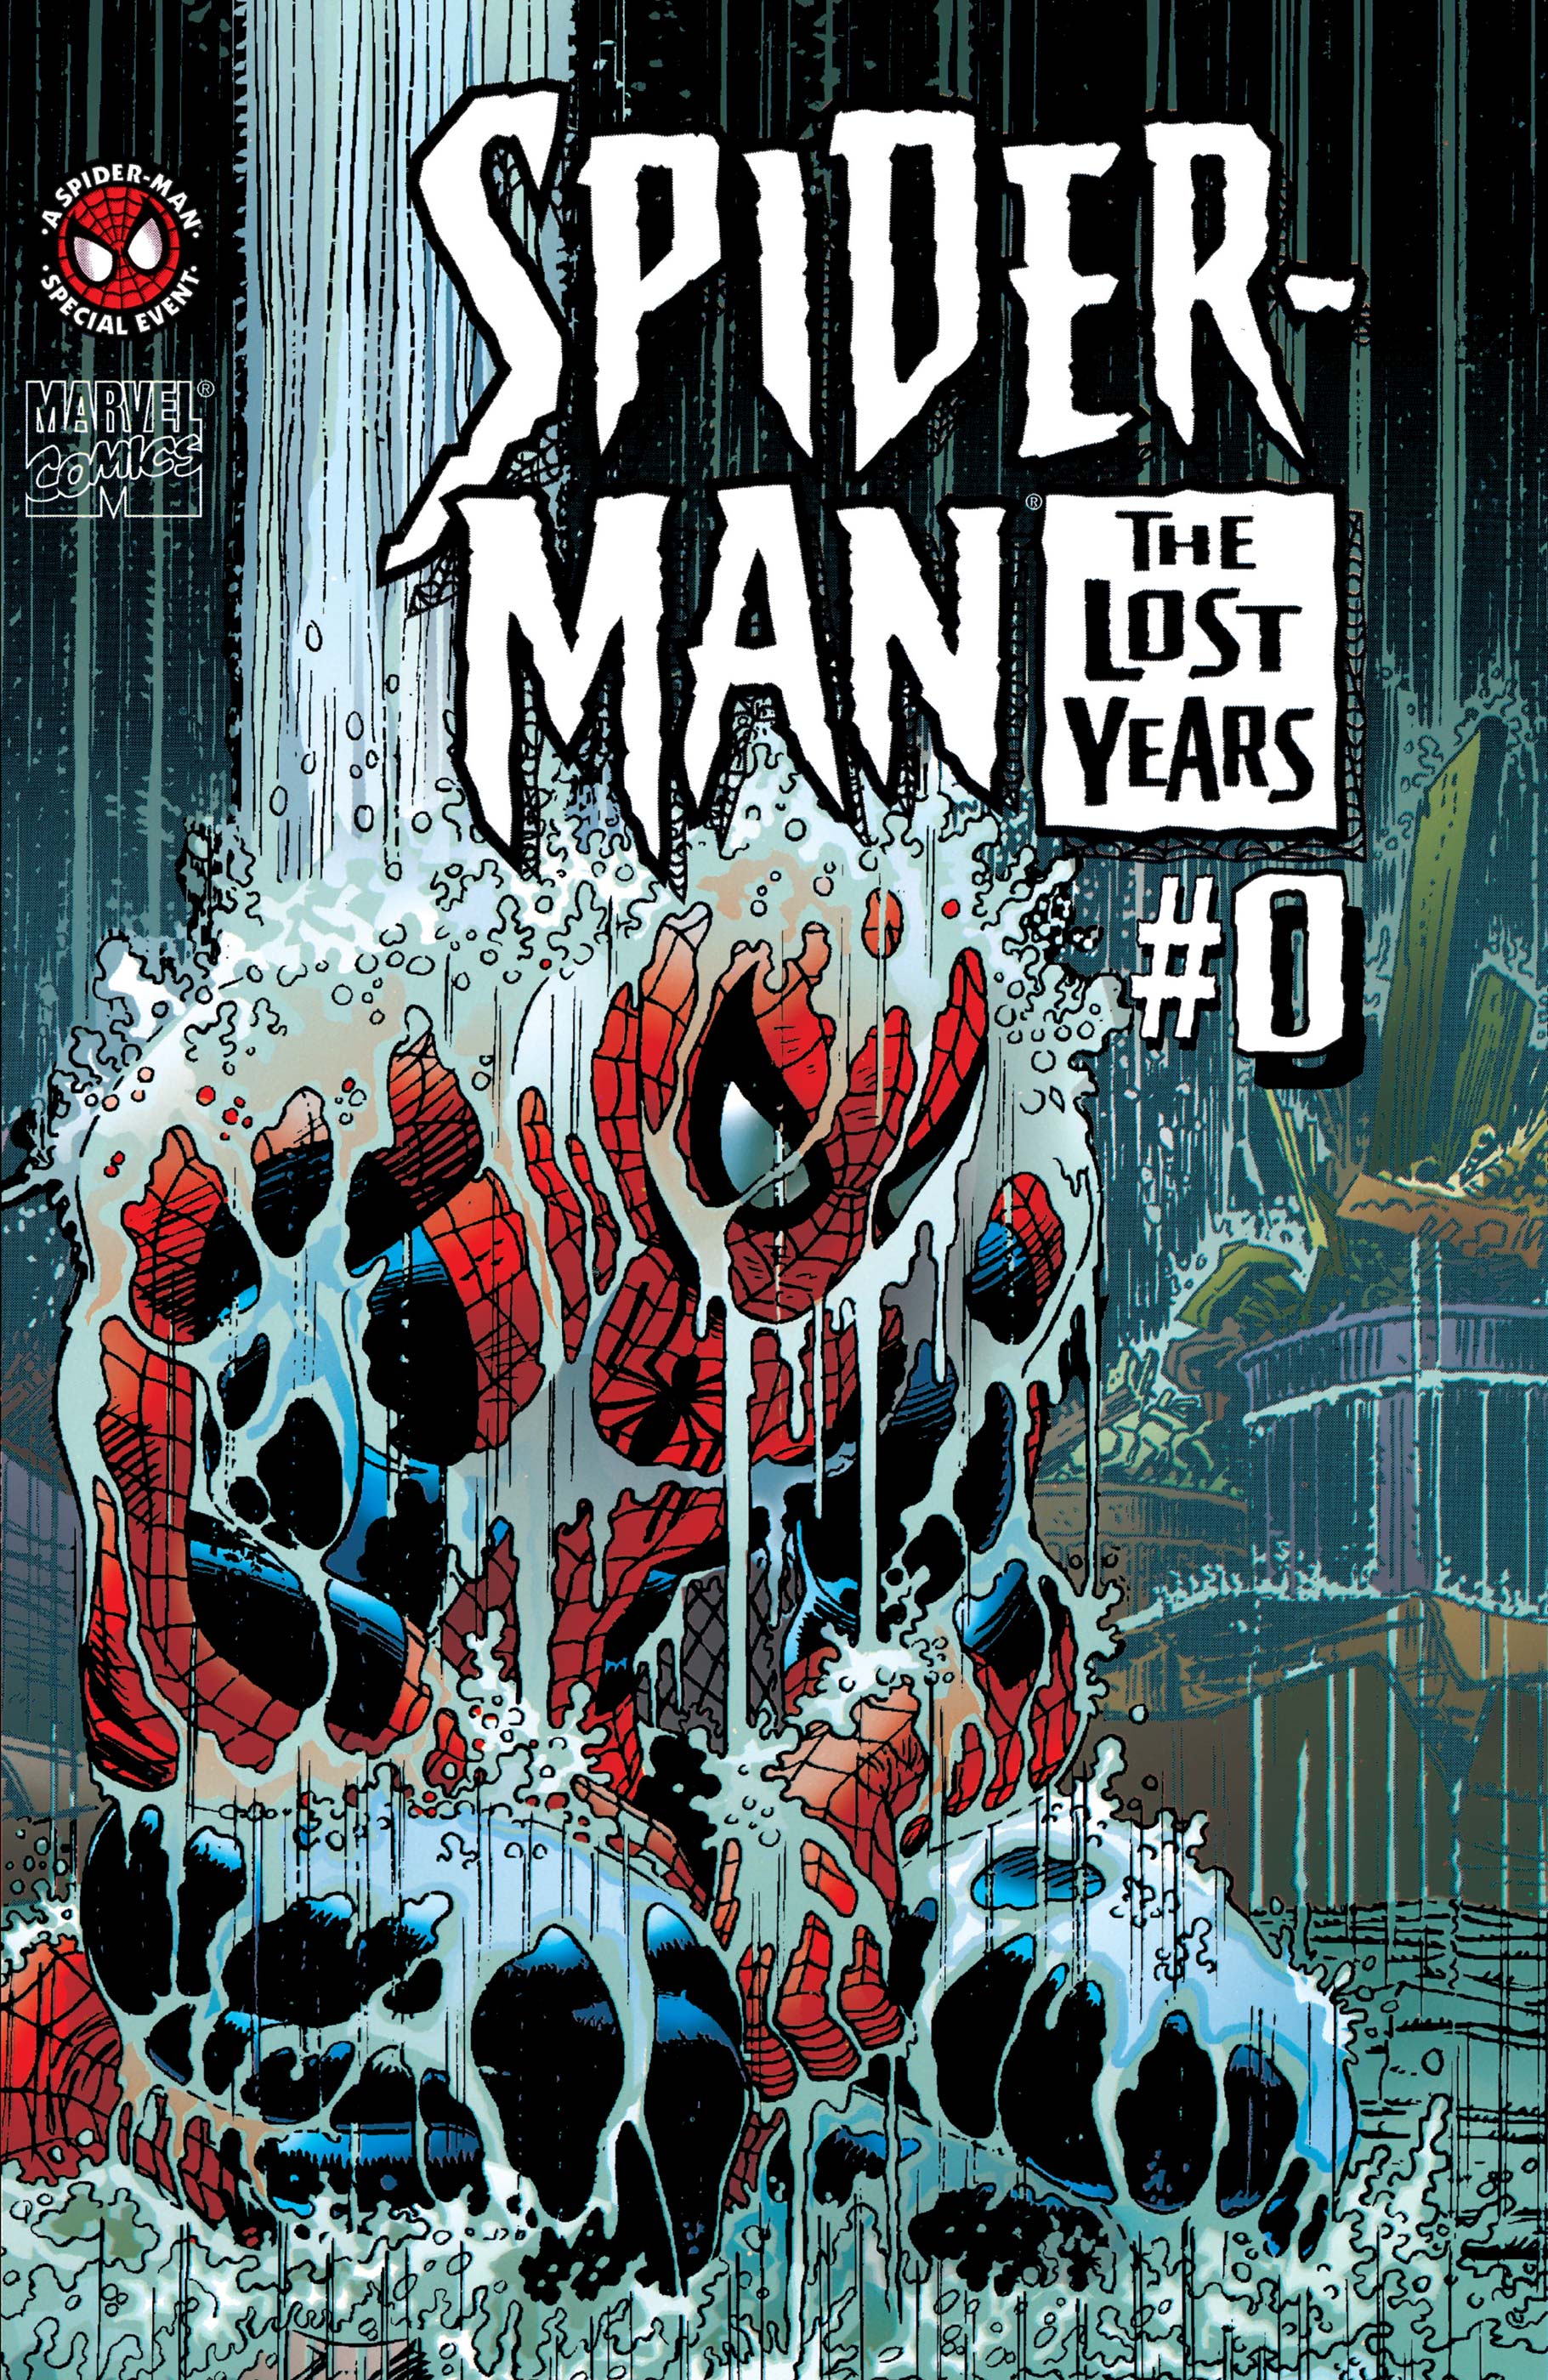 USA, 1995 The Lost Years # 1 of 3 Spiderman 